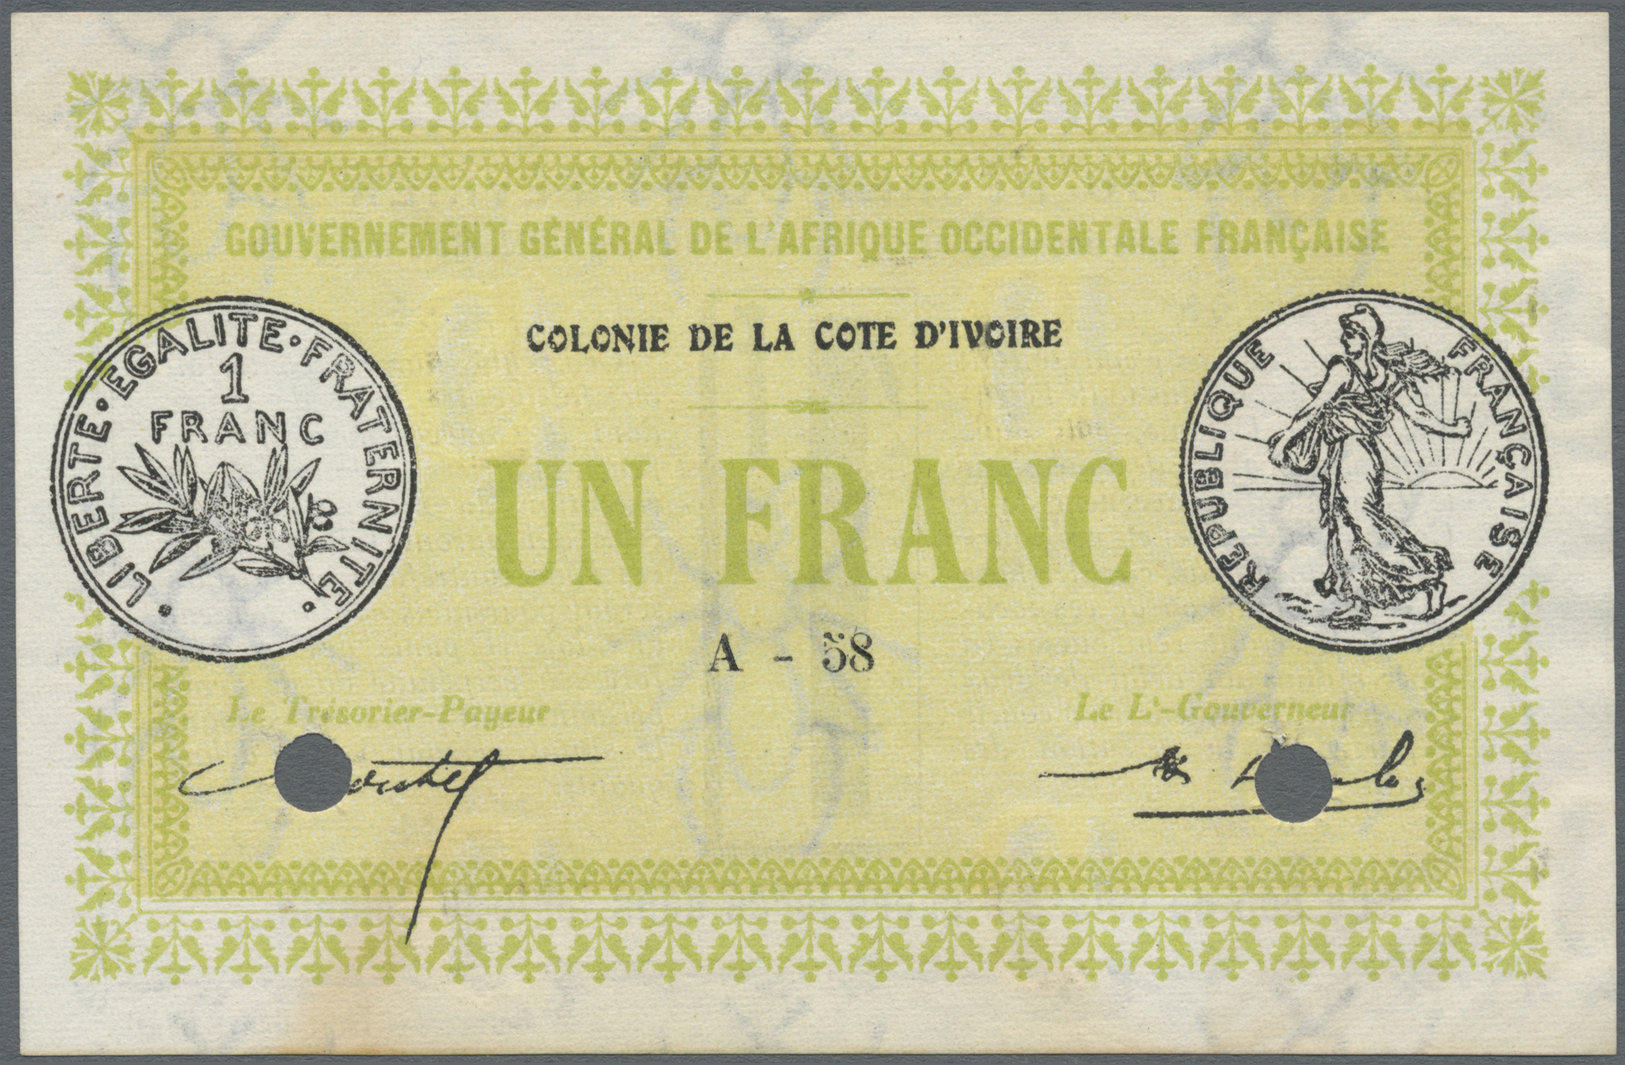 01292 Ivory Coast / Elfenbeinküste: 1 Franc 1917 Proof Print Without Serial Number And Cancellation Holes, Small Stainin - Côte D'Ivoire